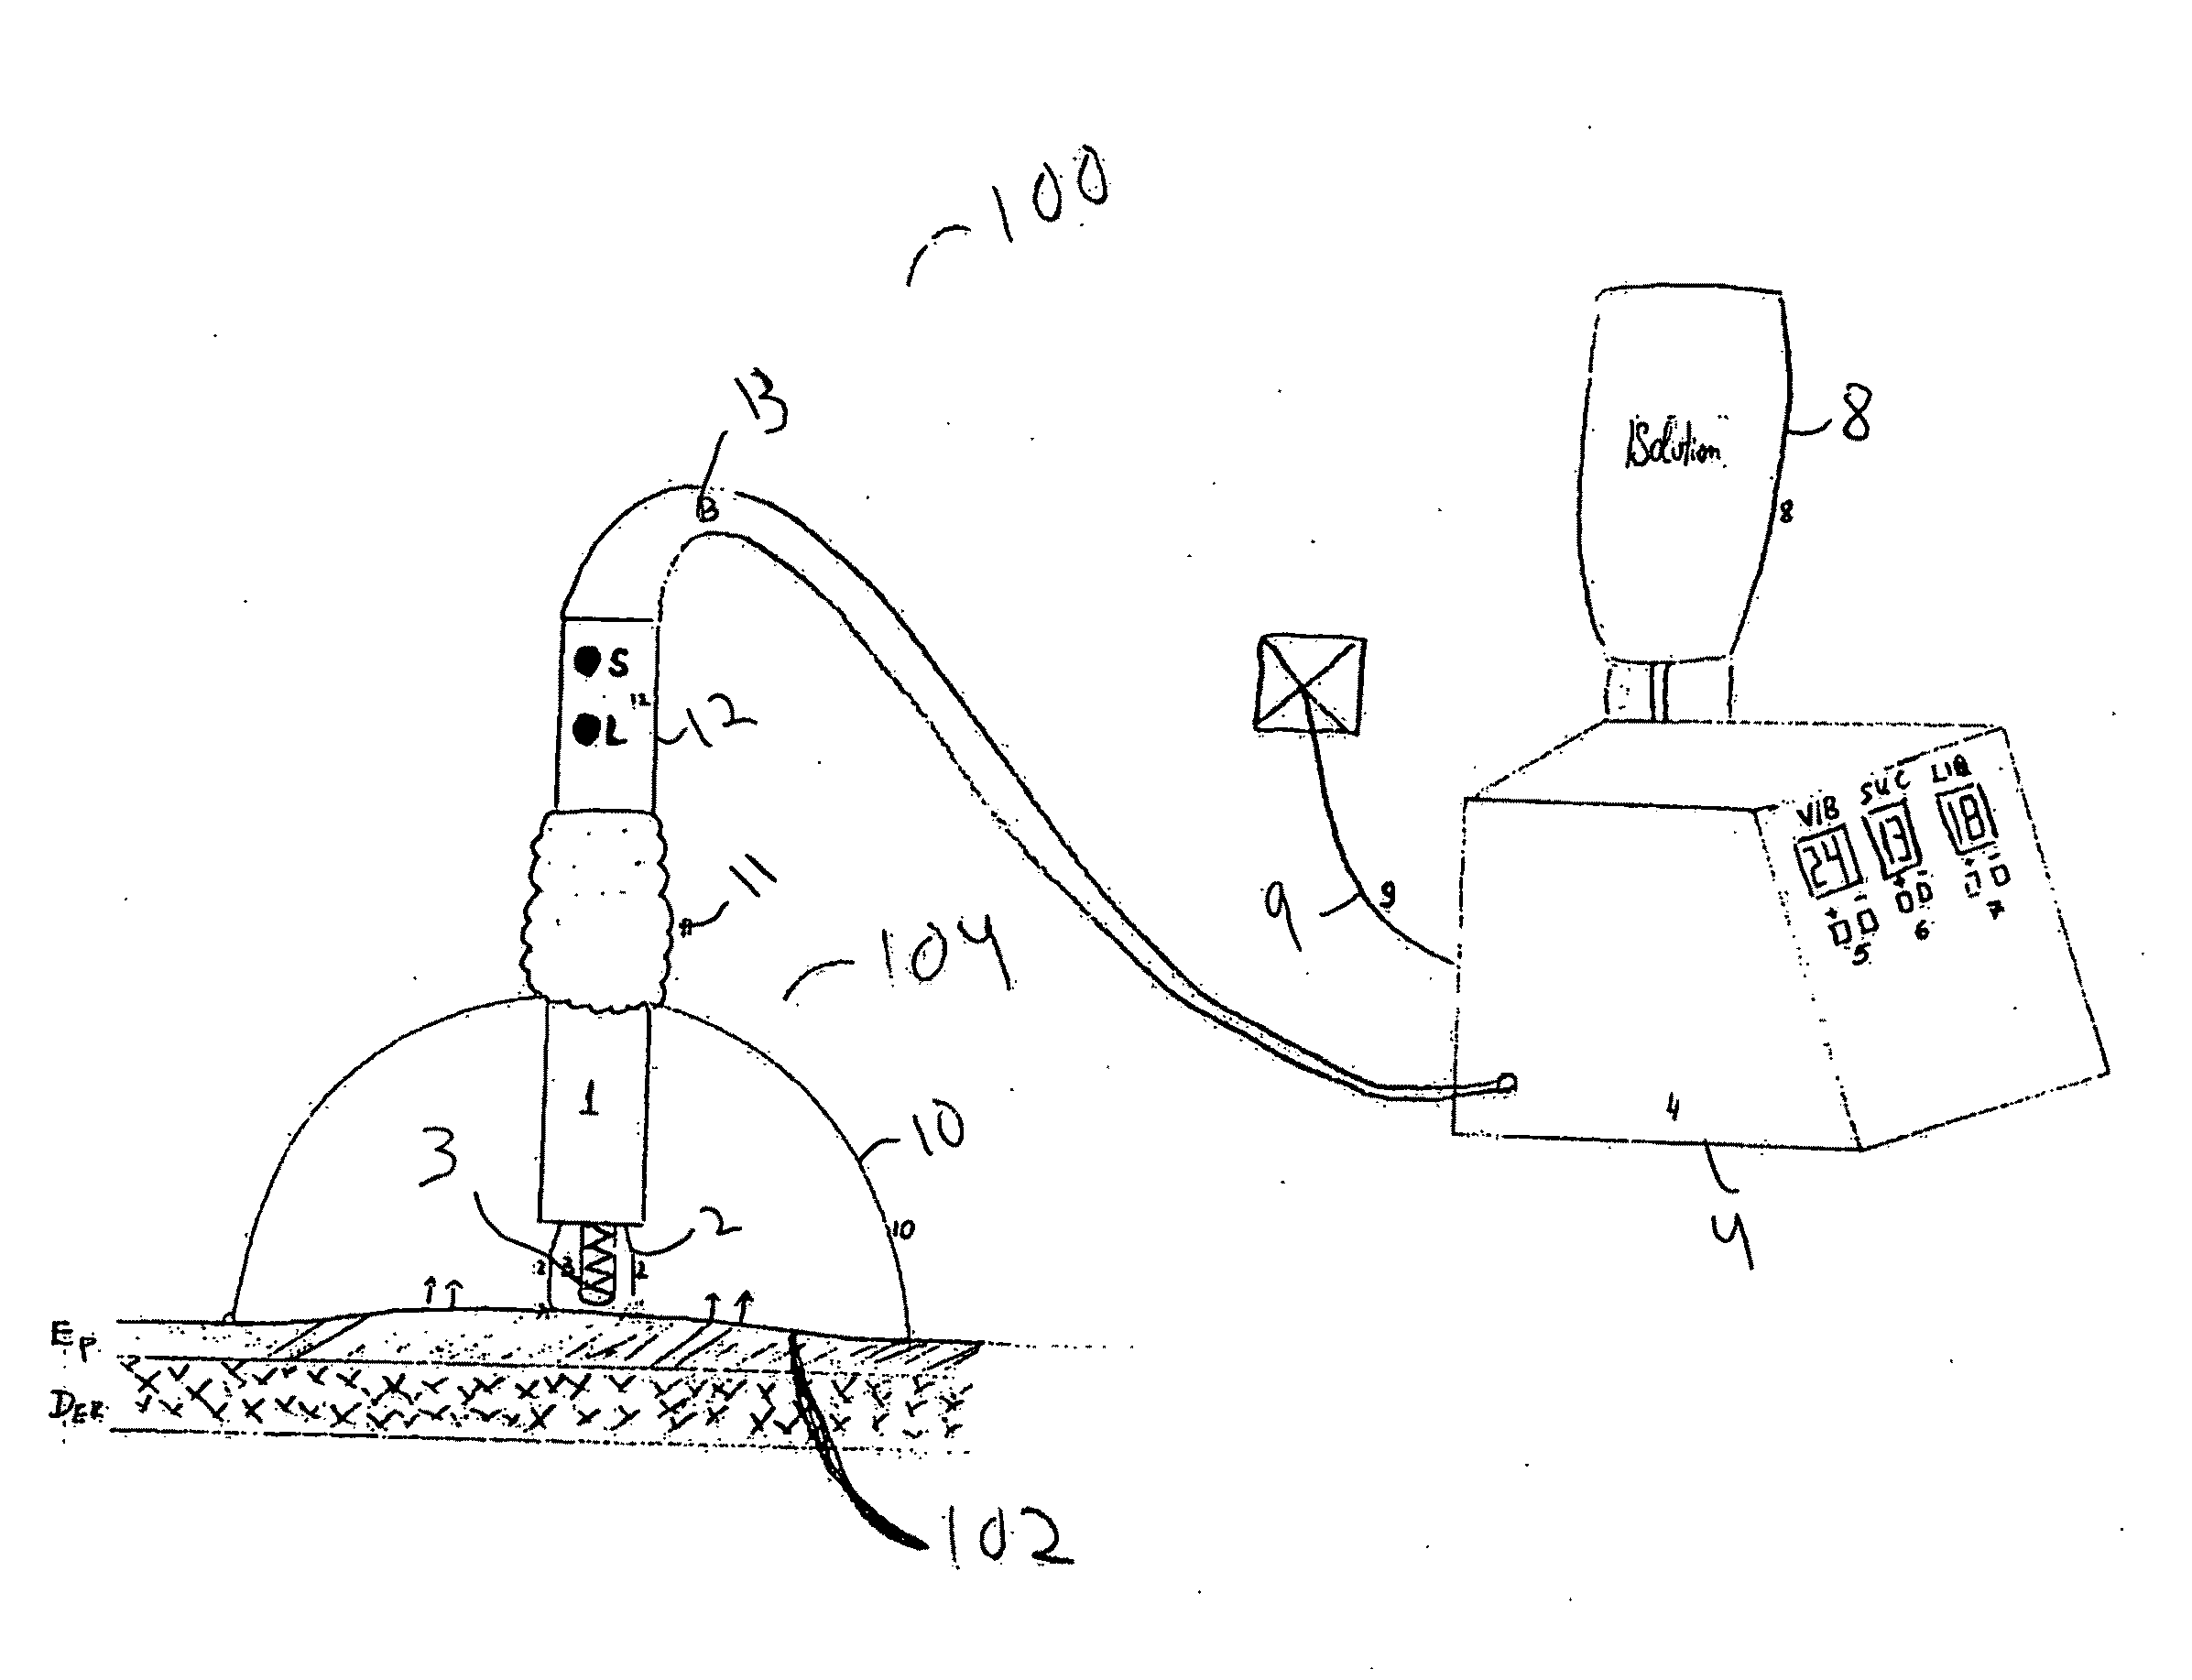 Device and system for skin treatment